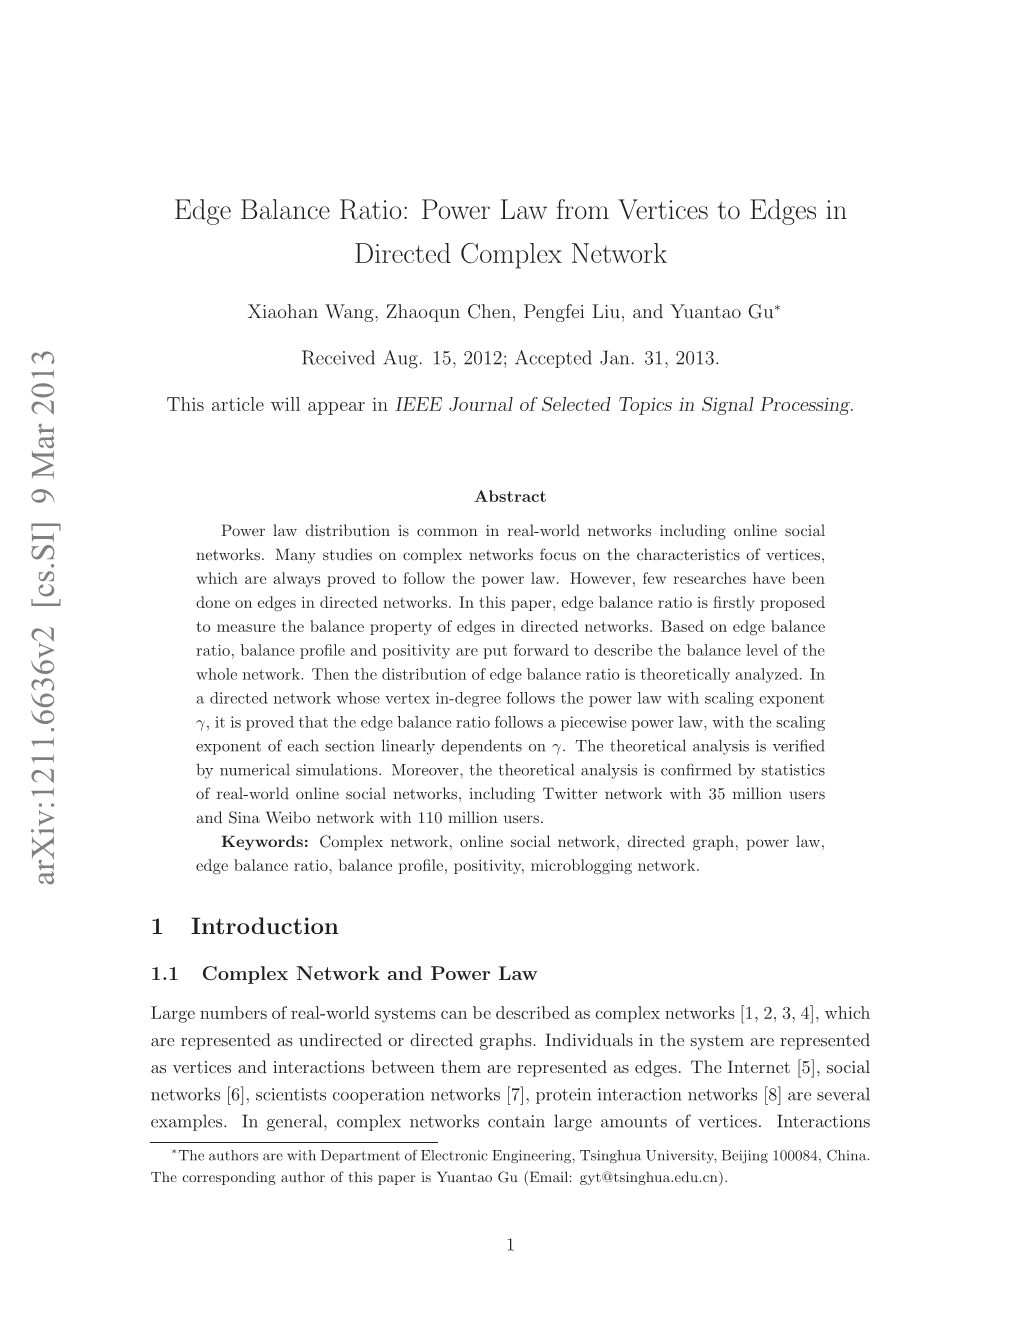 Edge Balance Ratio: Power Law from Vertices to Edges in Directed